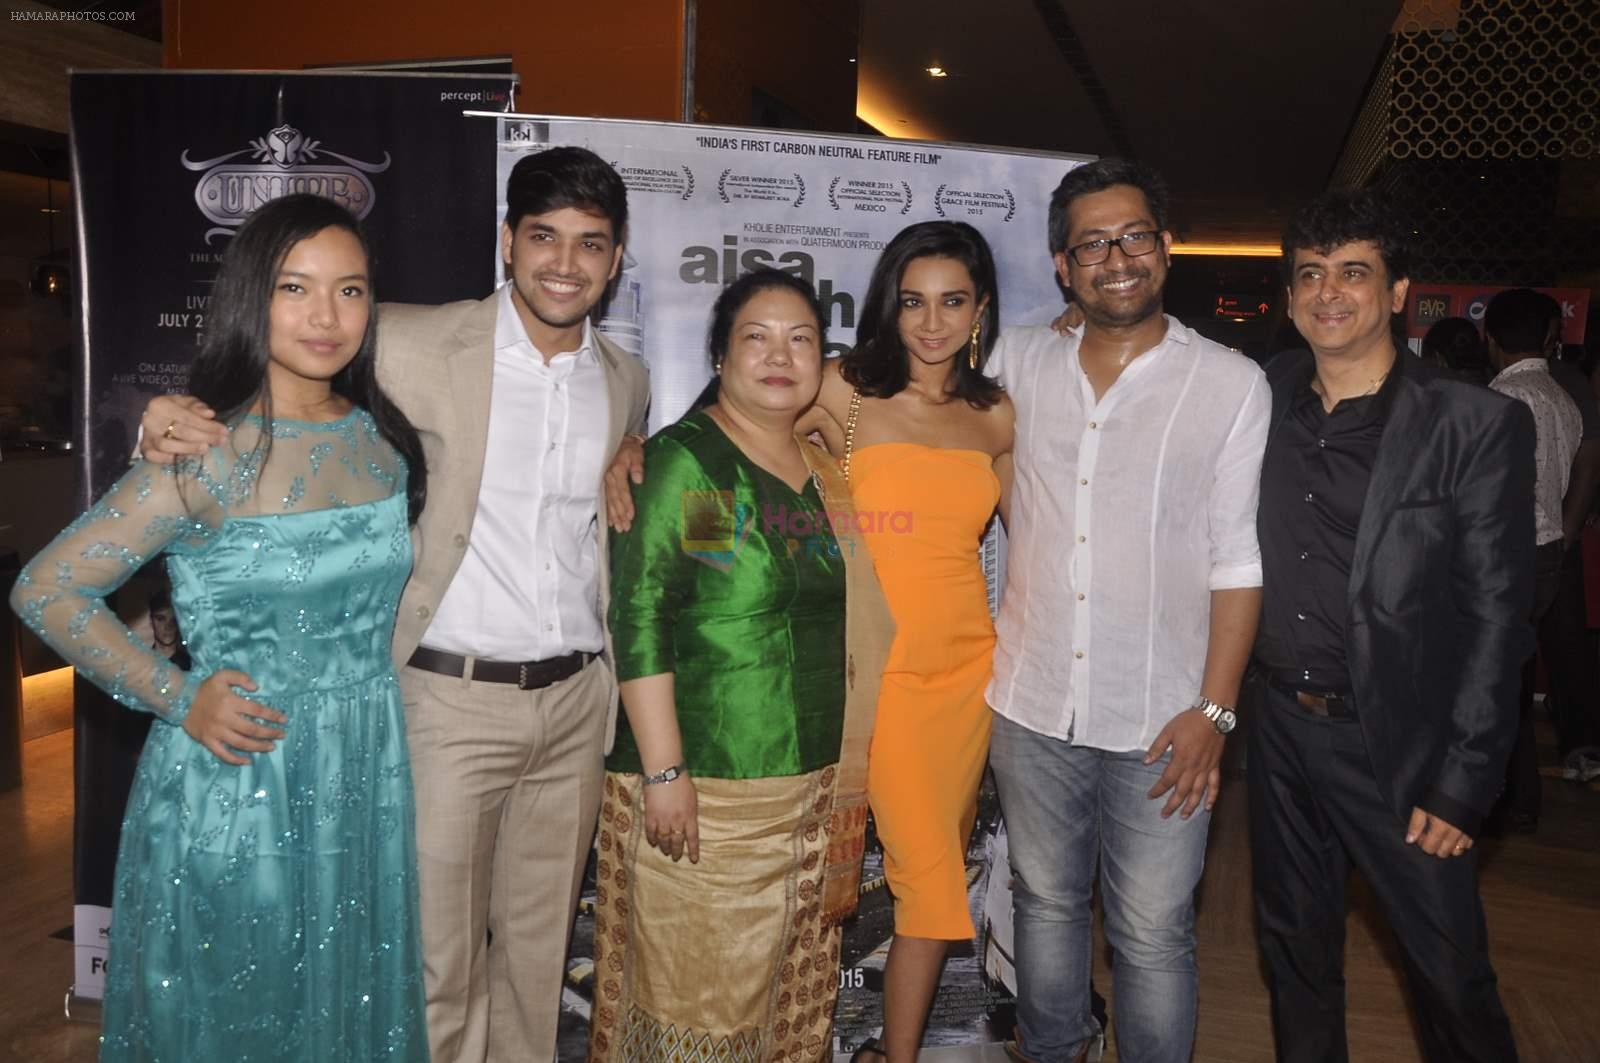 Kymsleen Kholie, Ira Dubey at the Premiere of Aisa Yeh Jahaan in PVR on 23rd July 2015